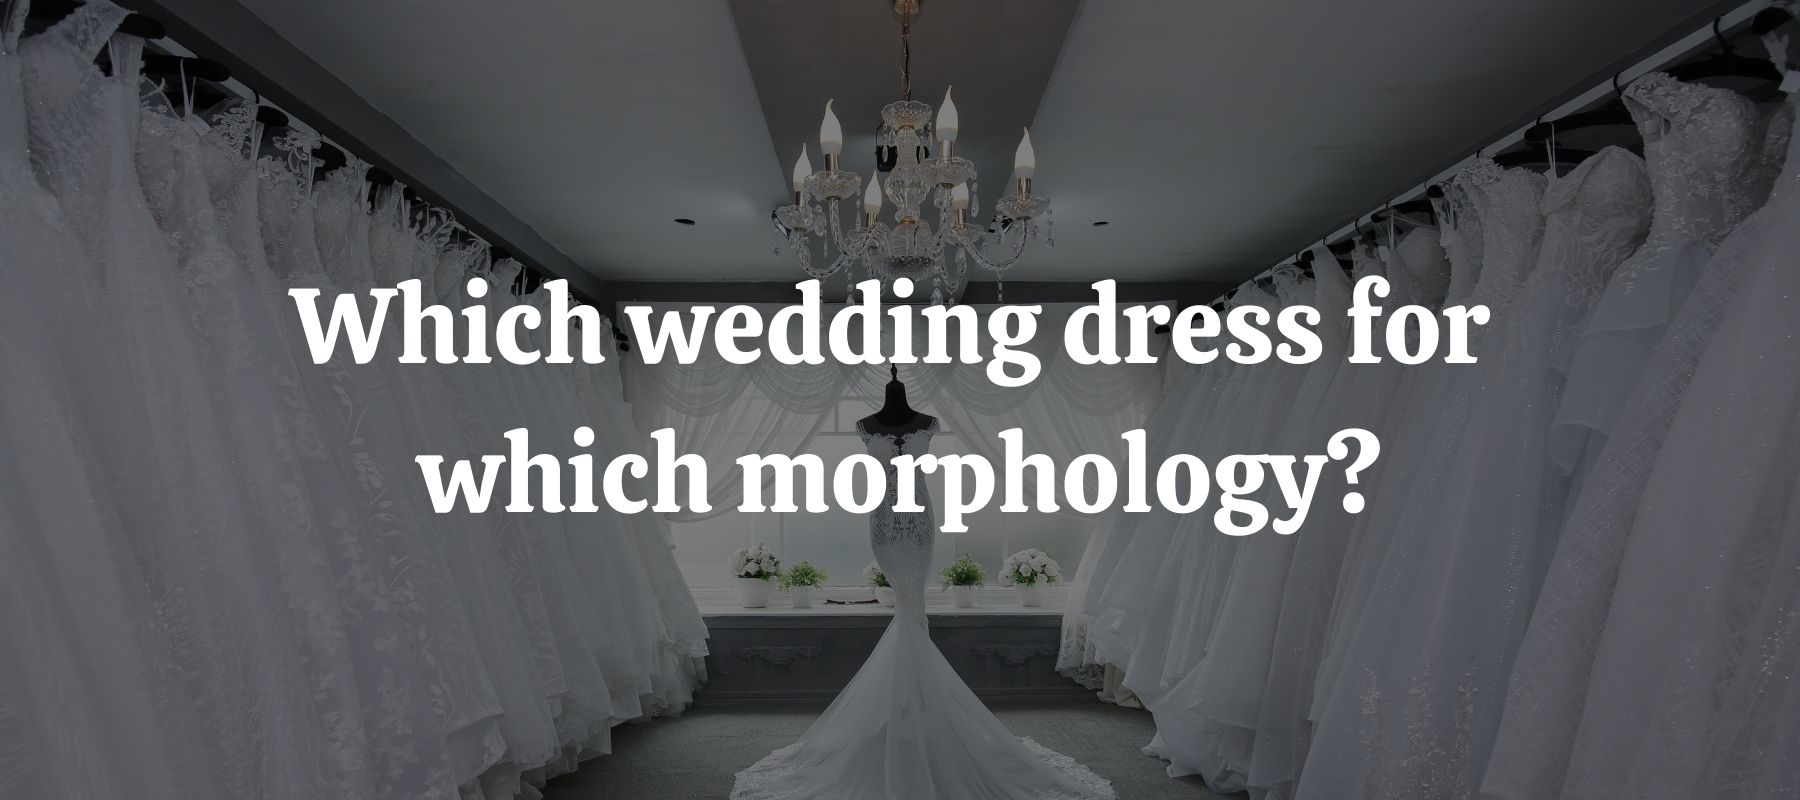 Which wedding dress for which morphology